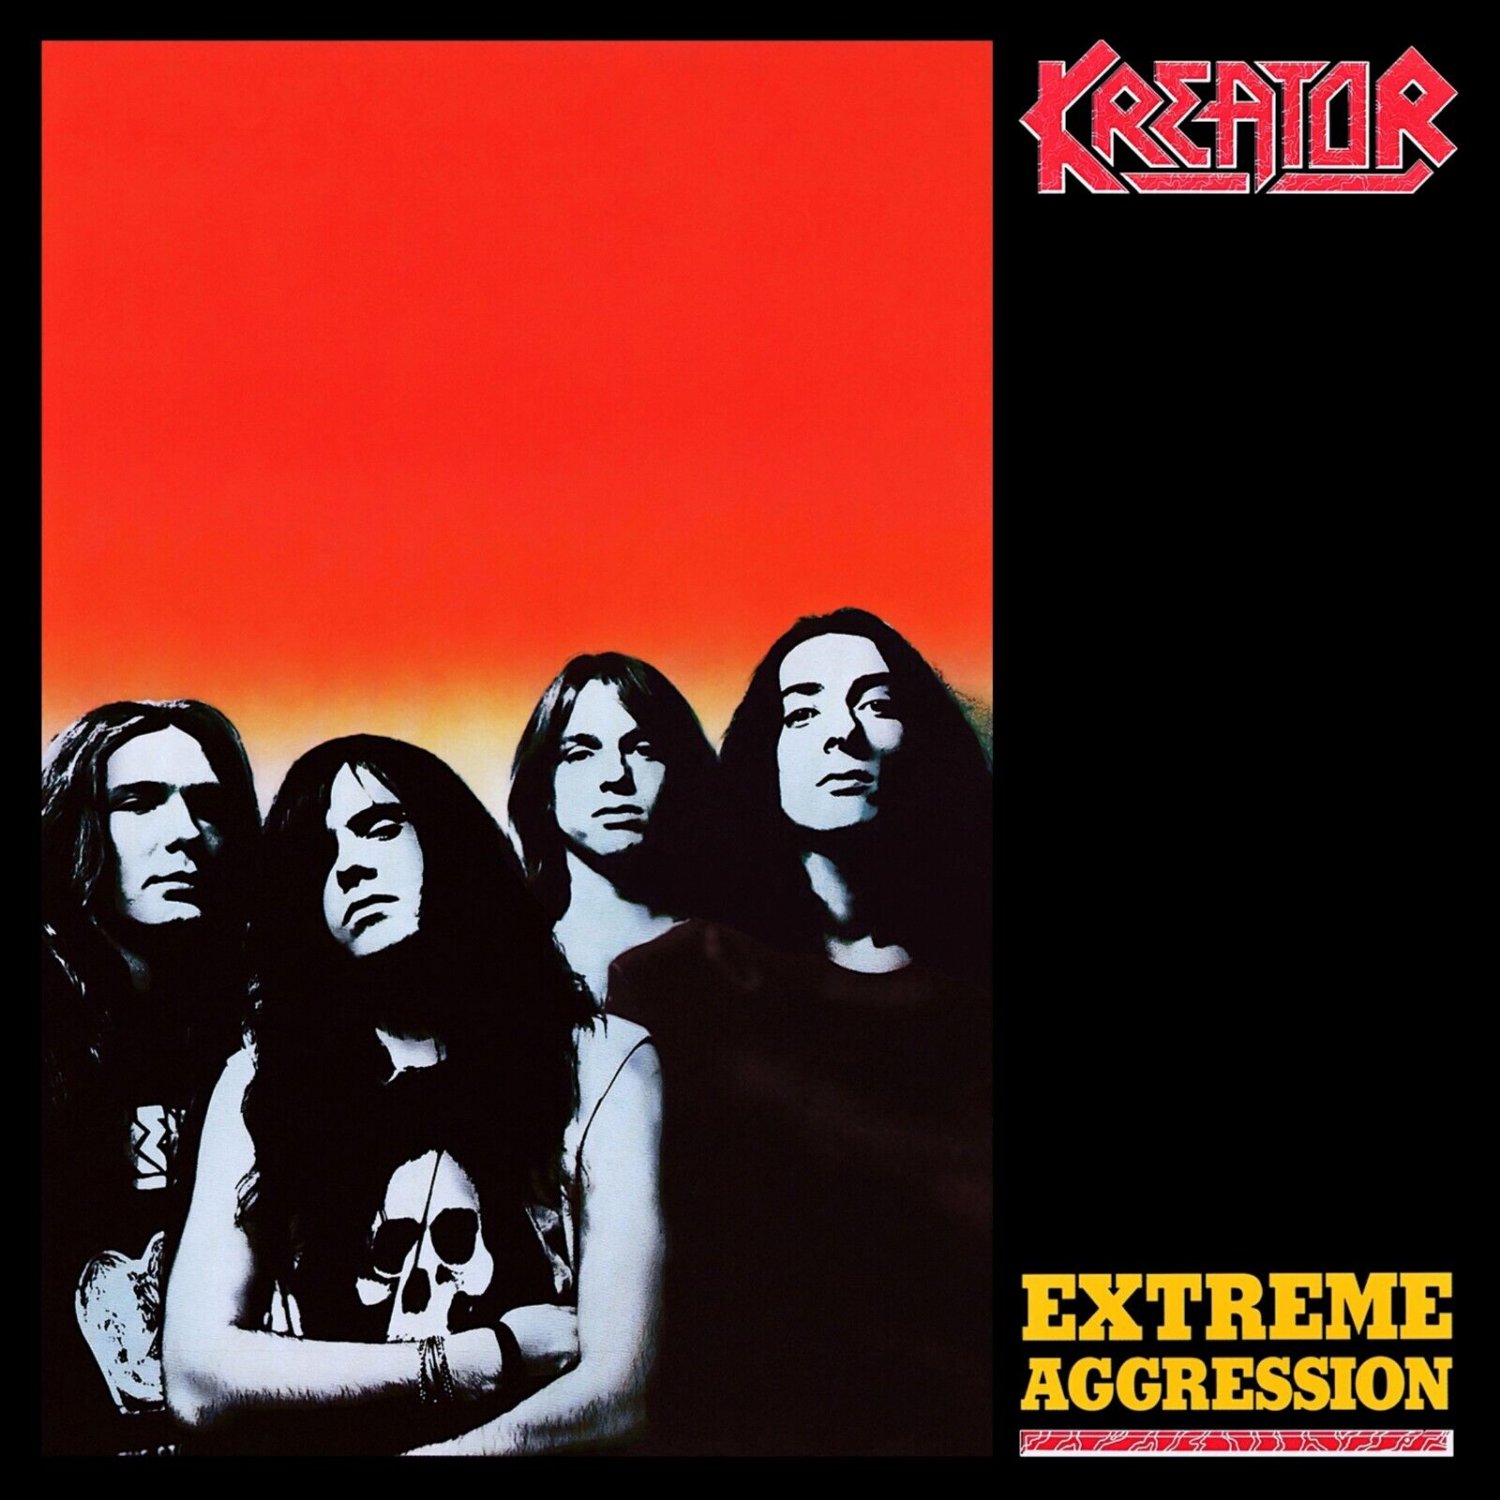 KREATOR Extreme Aggression BANNER 3x3 Ft Fabric Poster Tapestry Flag album art